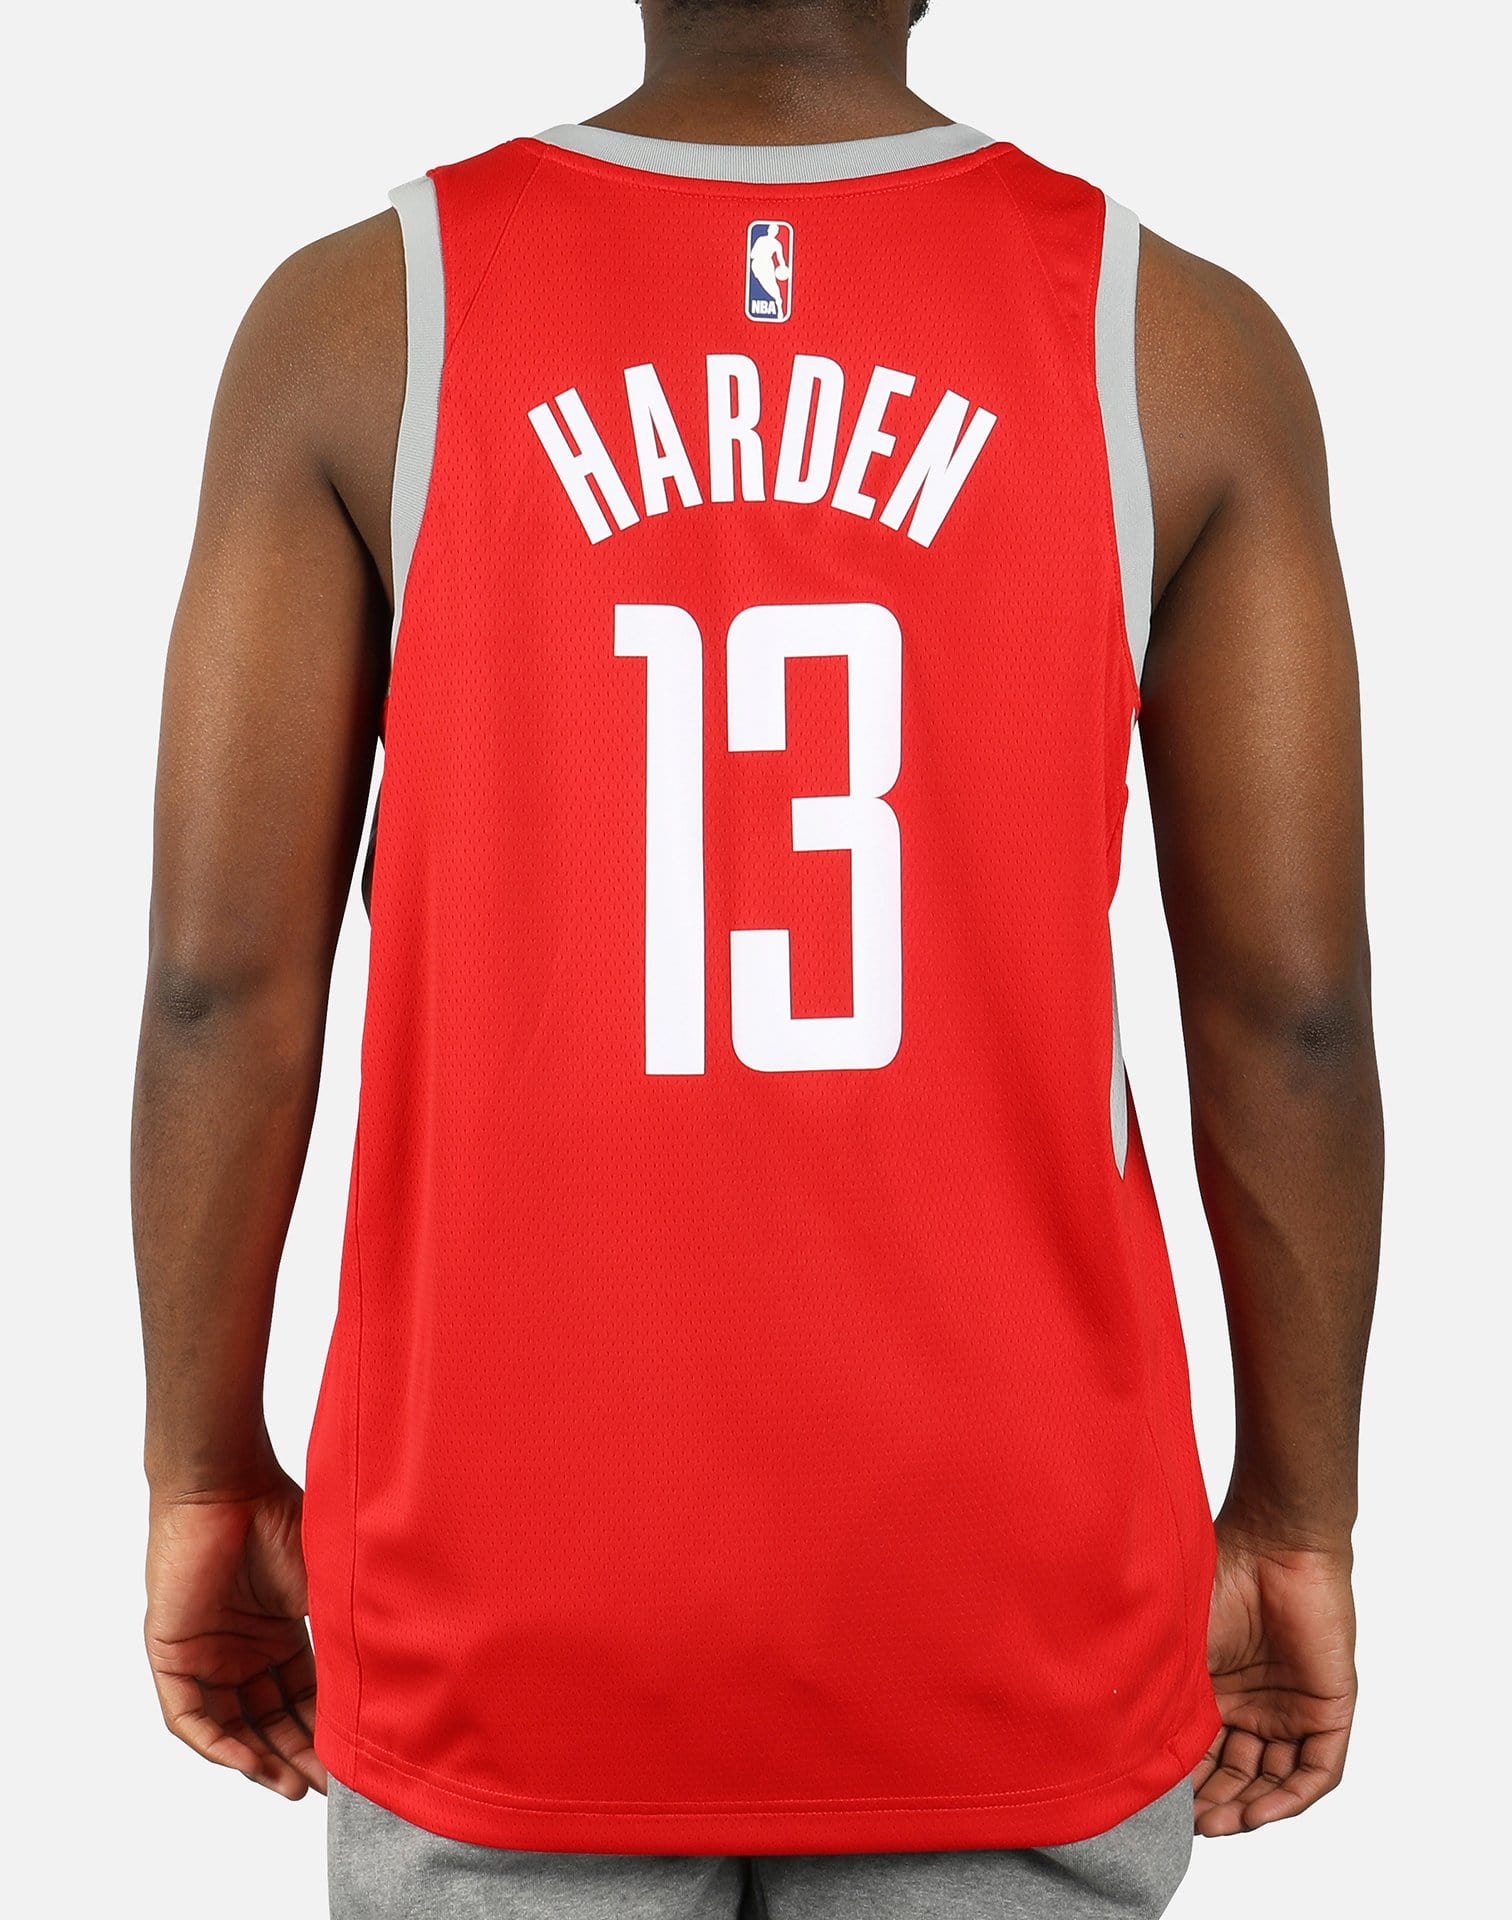 Buy Rockets City Edition gear though TDS - The Dream Shake